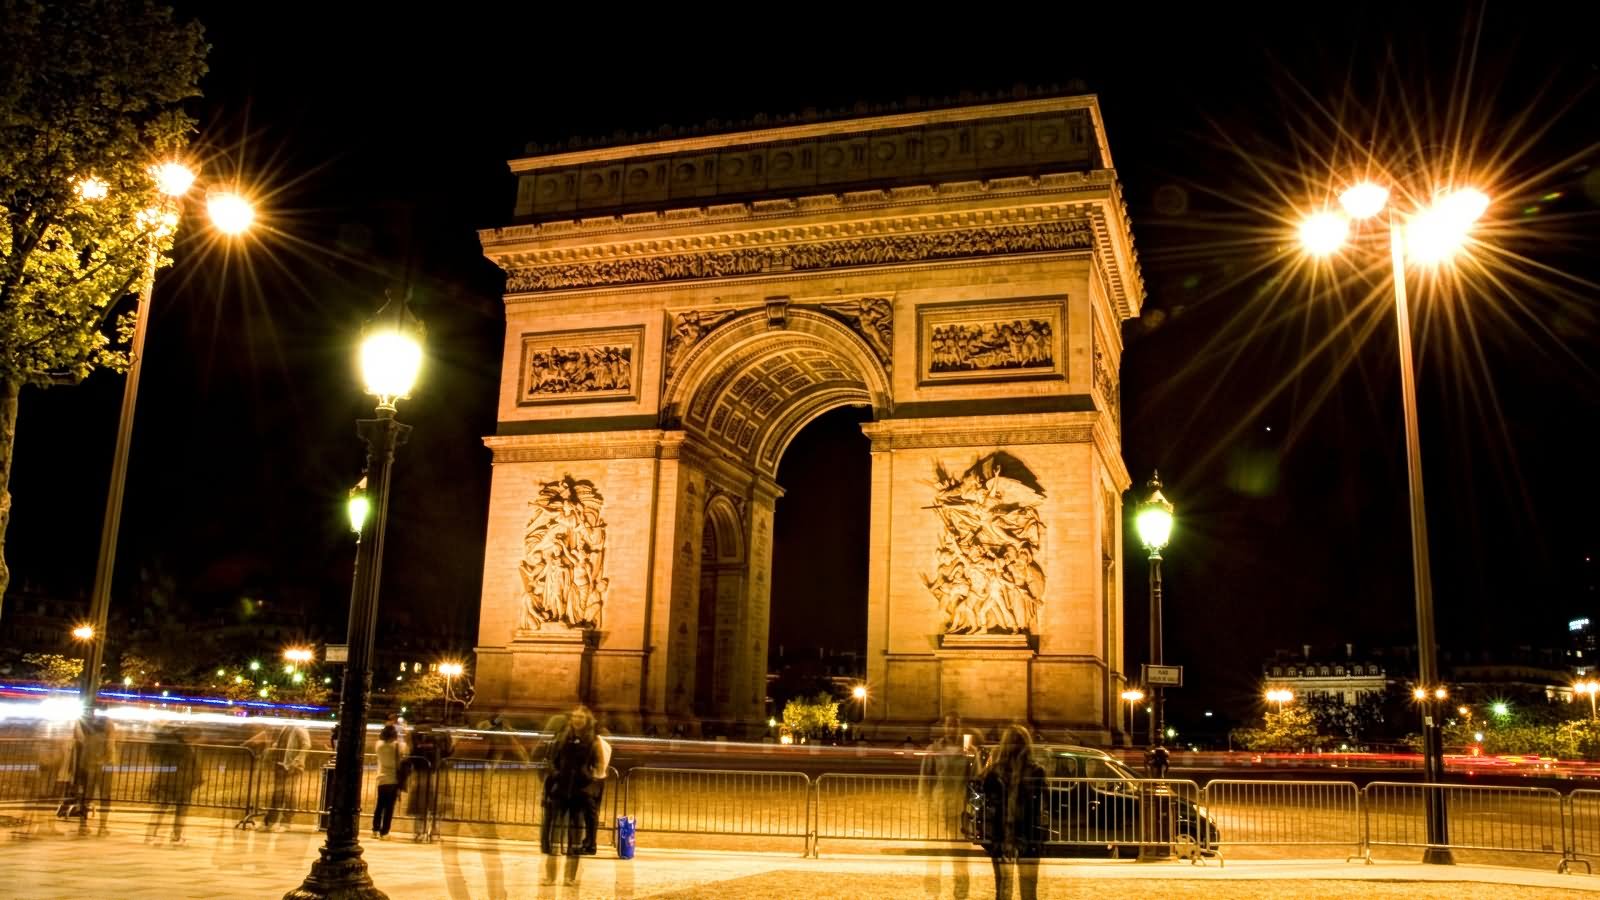 Side View Night Picture Of Arc de Triomphe